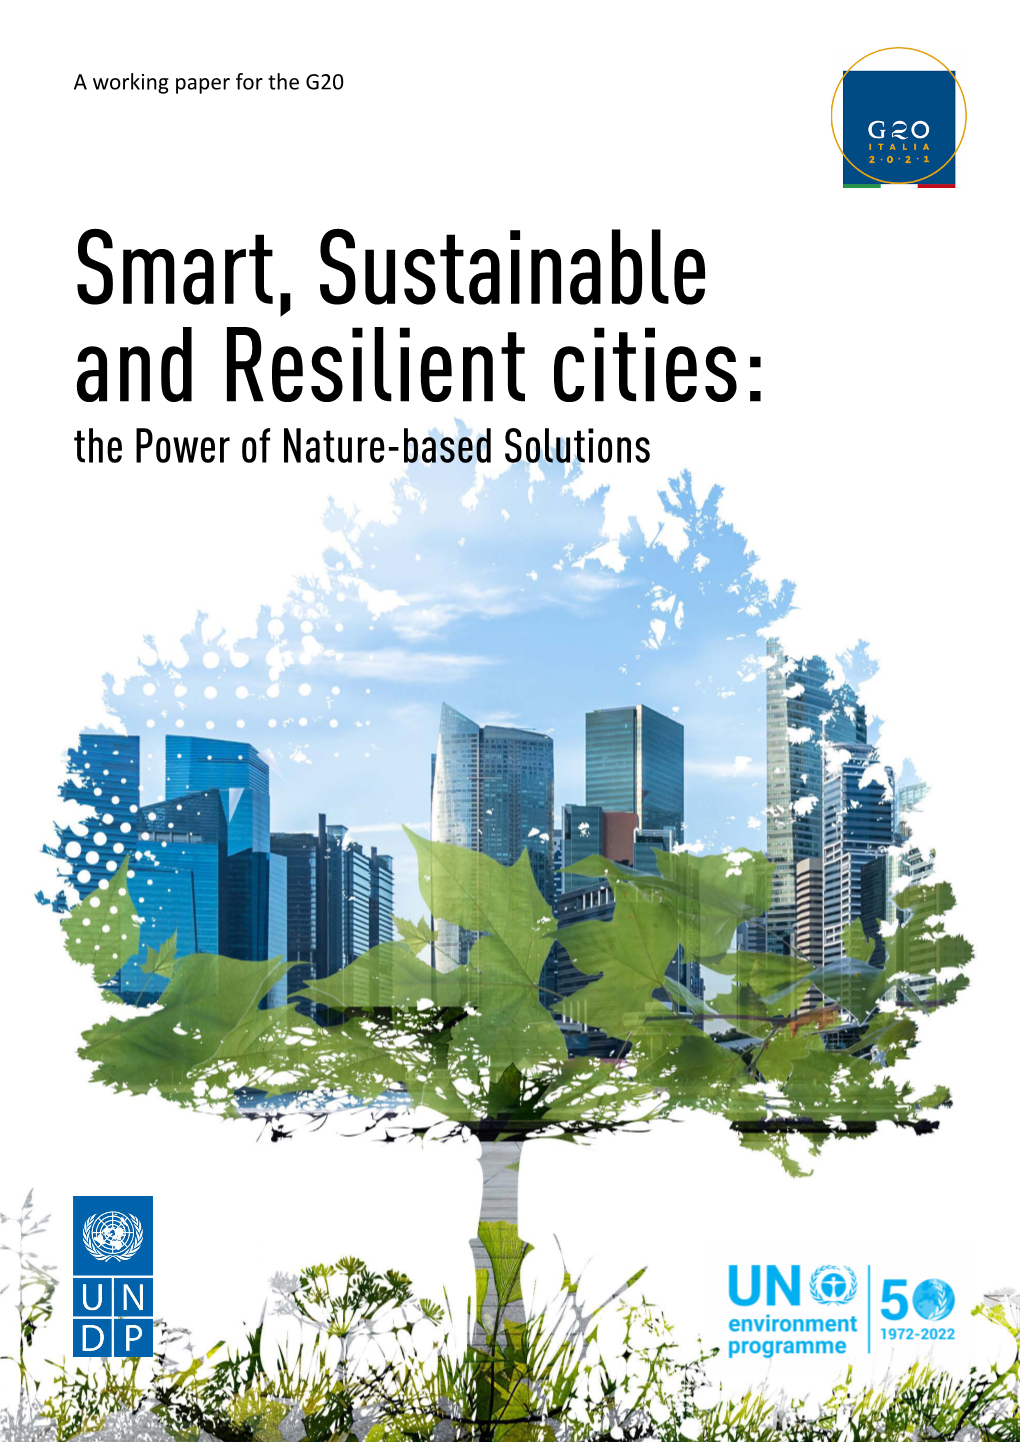 Smart, Sustainable and Resilient Cities: the Power of Nature-Based Solutions